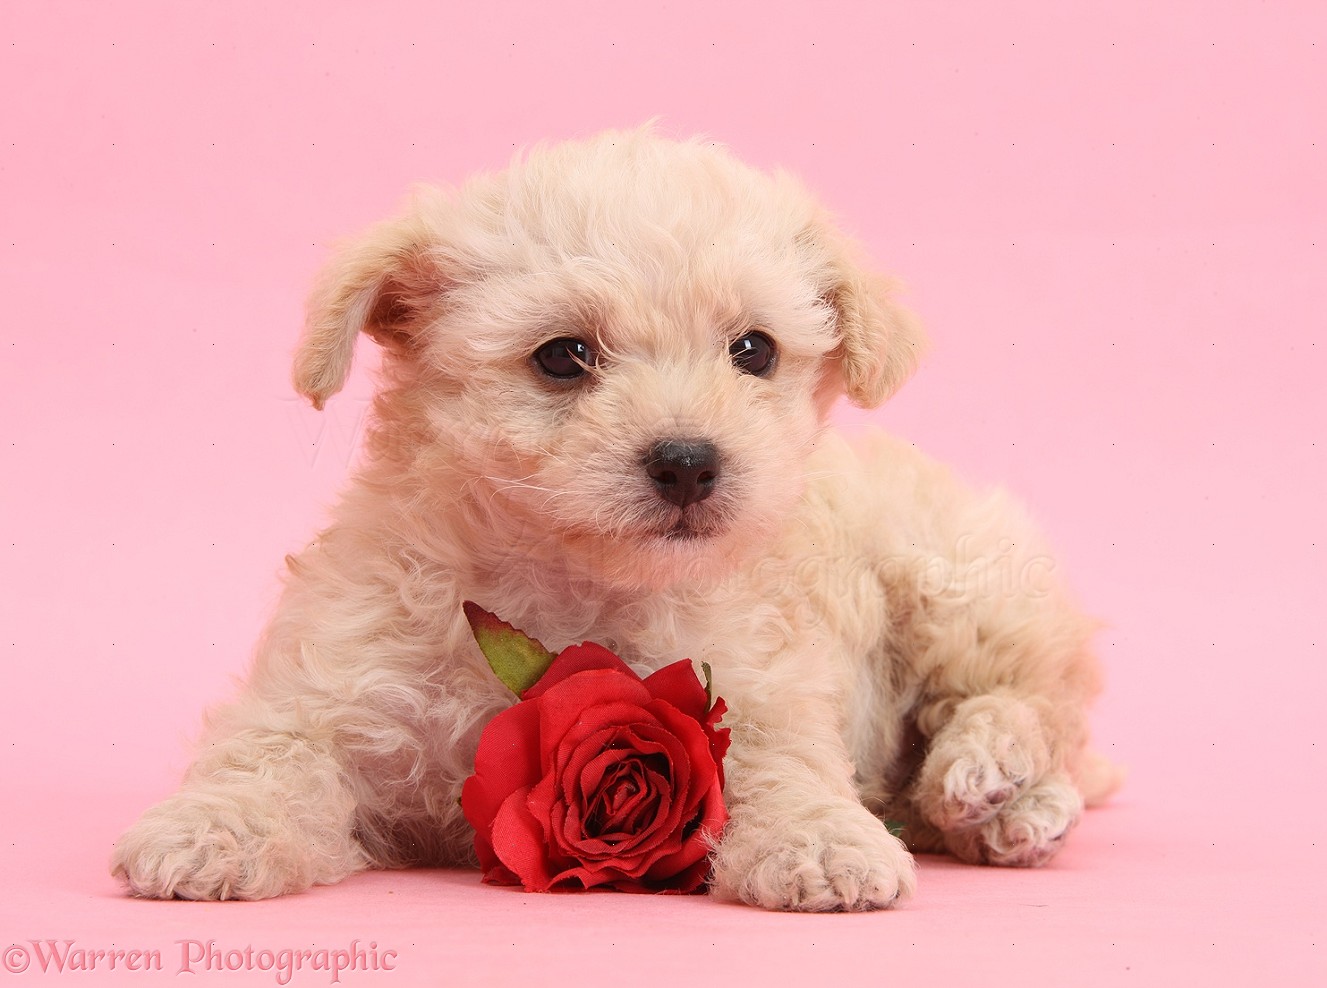 Dog Cute Valentine Puppy With Rose On Pink Background Photo Wp35546